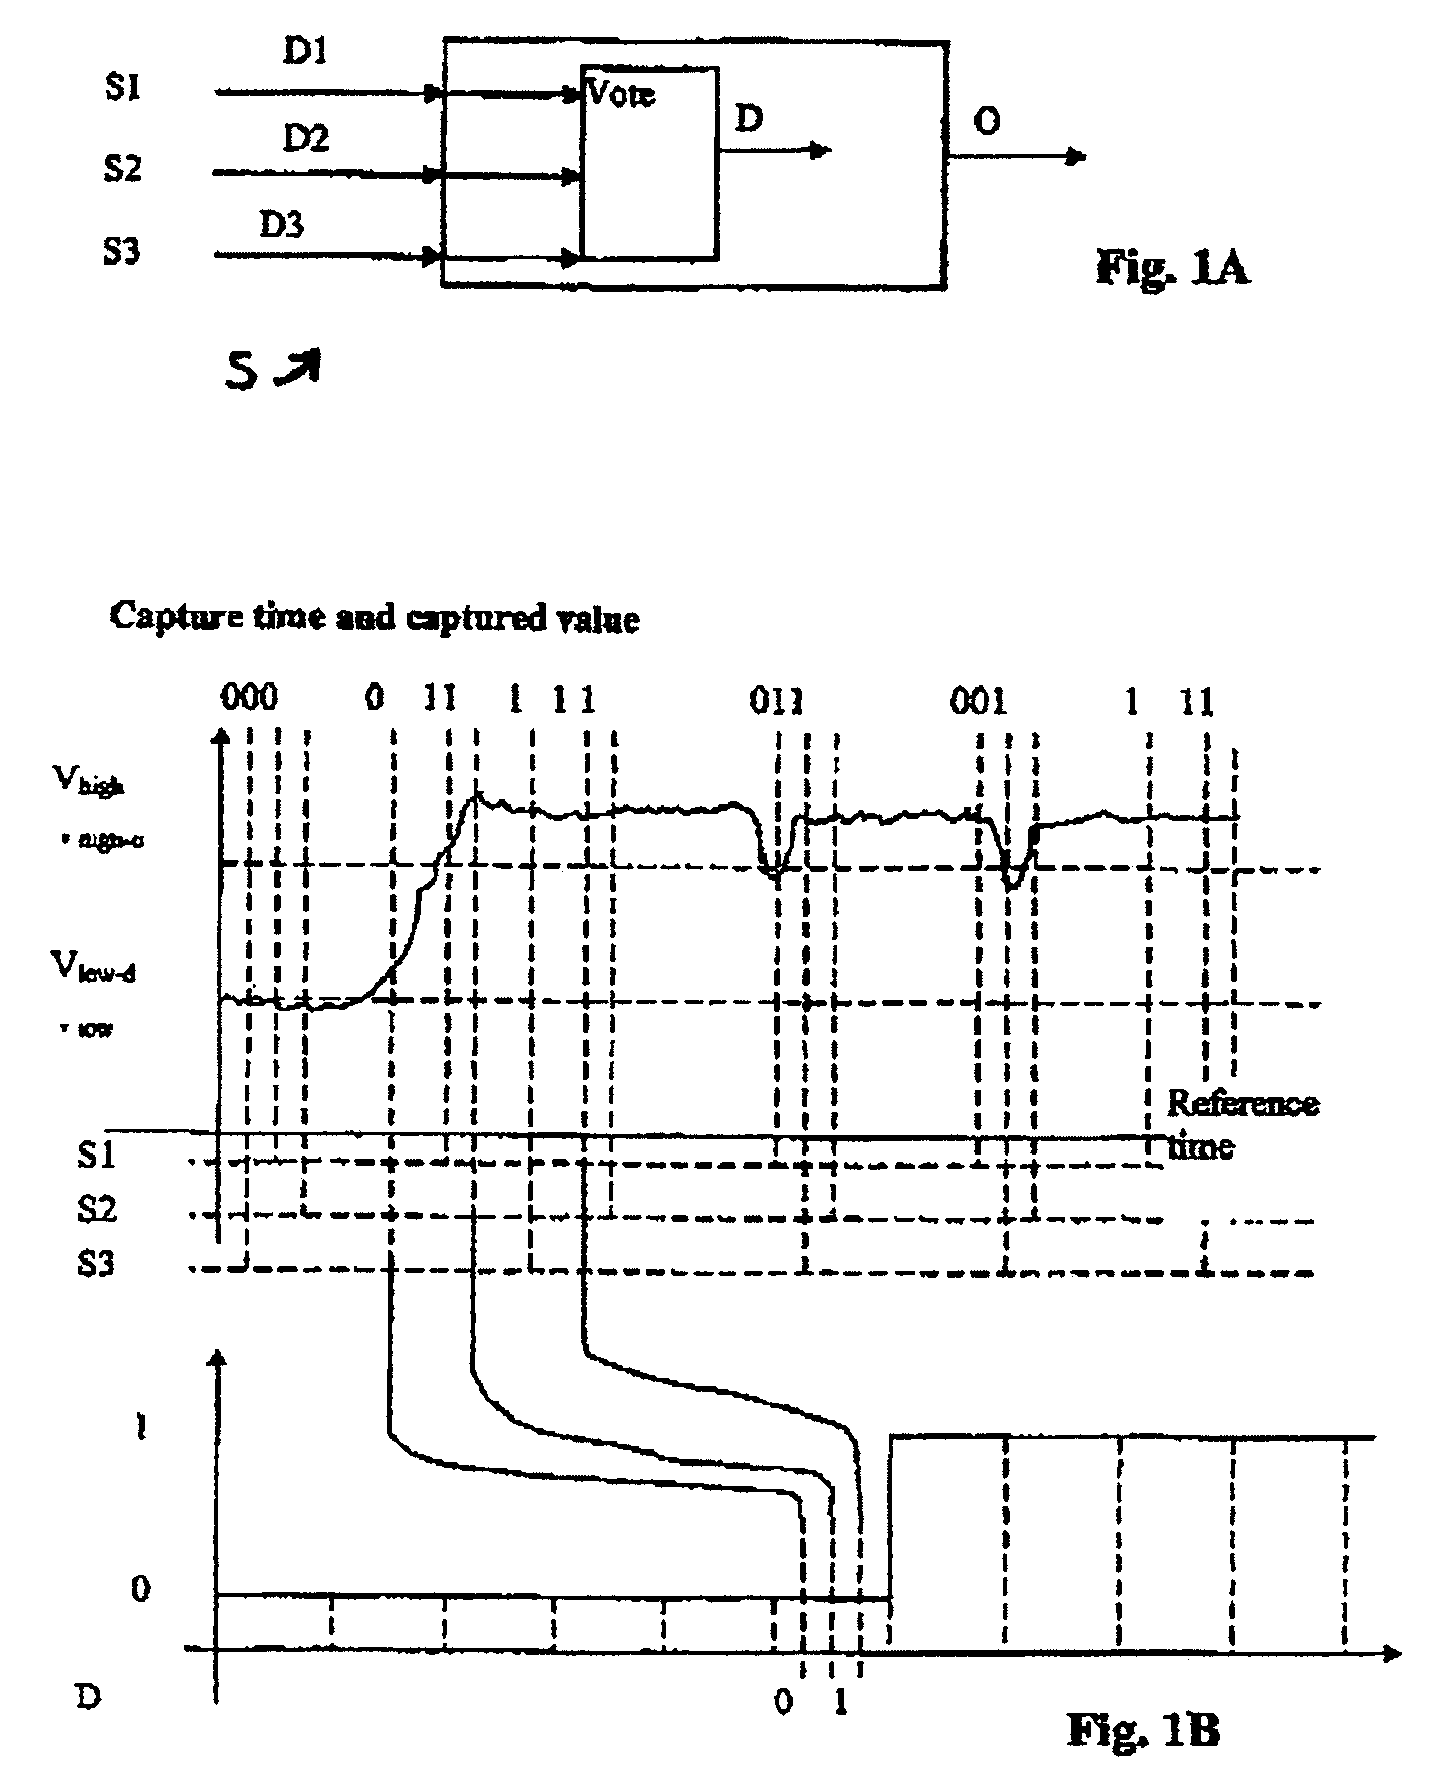 Method for design and verification of safety critical systems